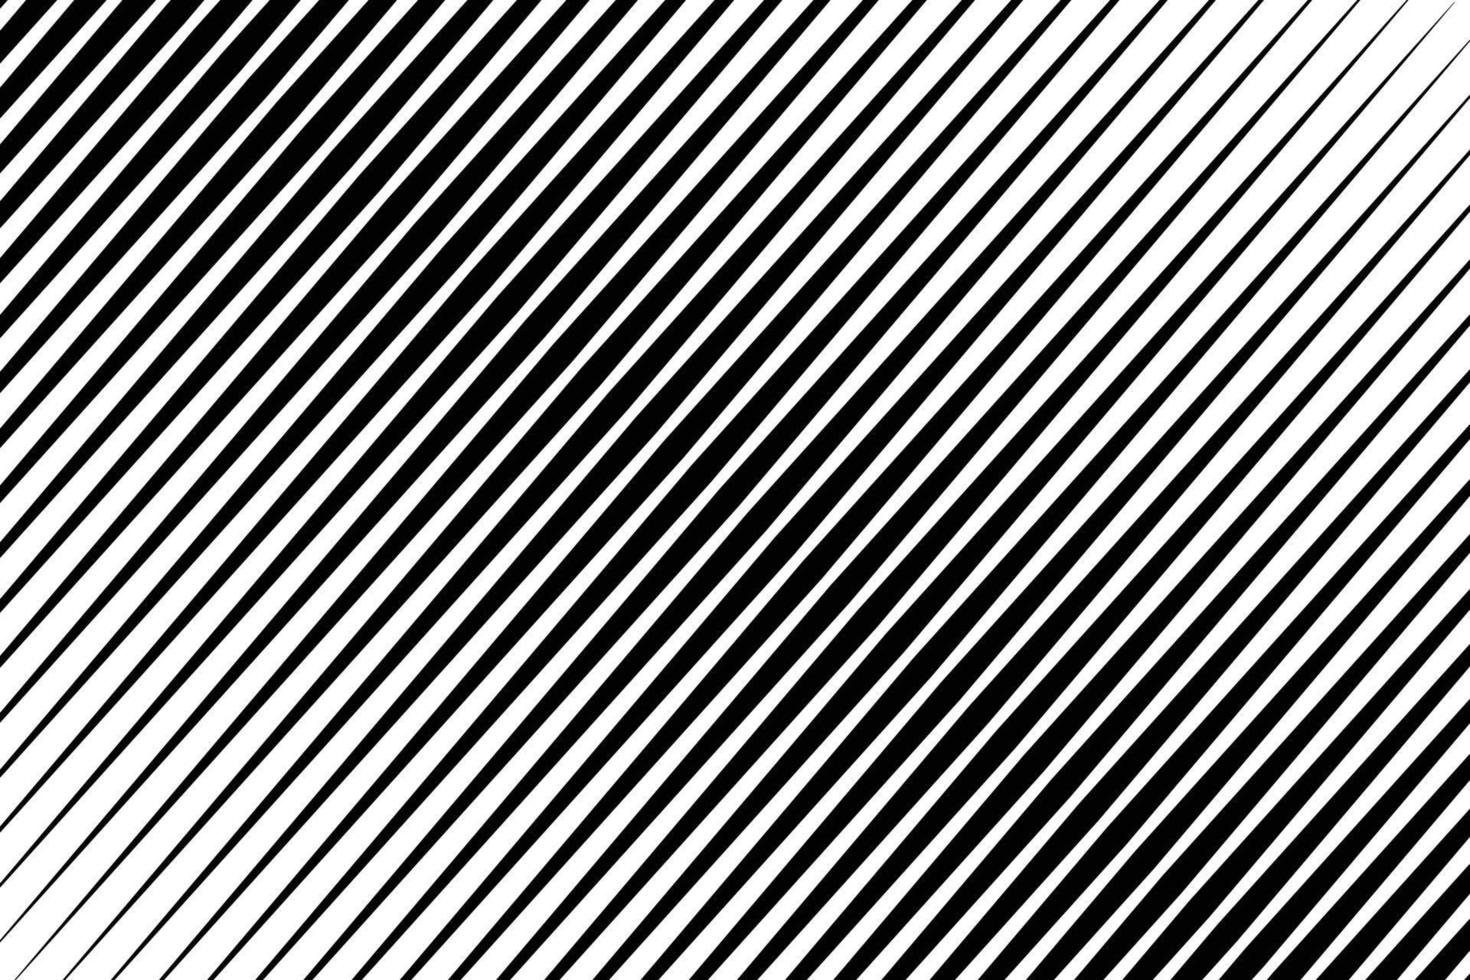 abstract diagonal black white lines pattern texture. vector